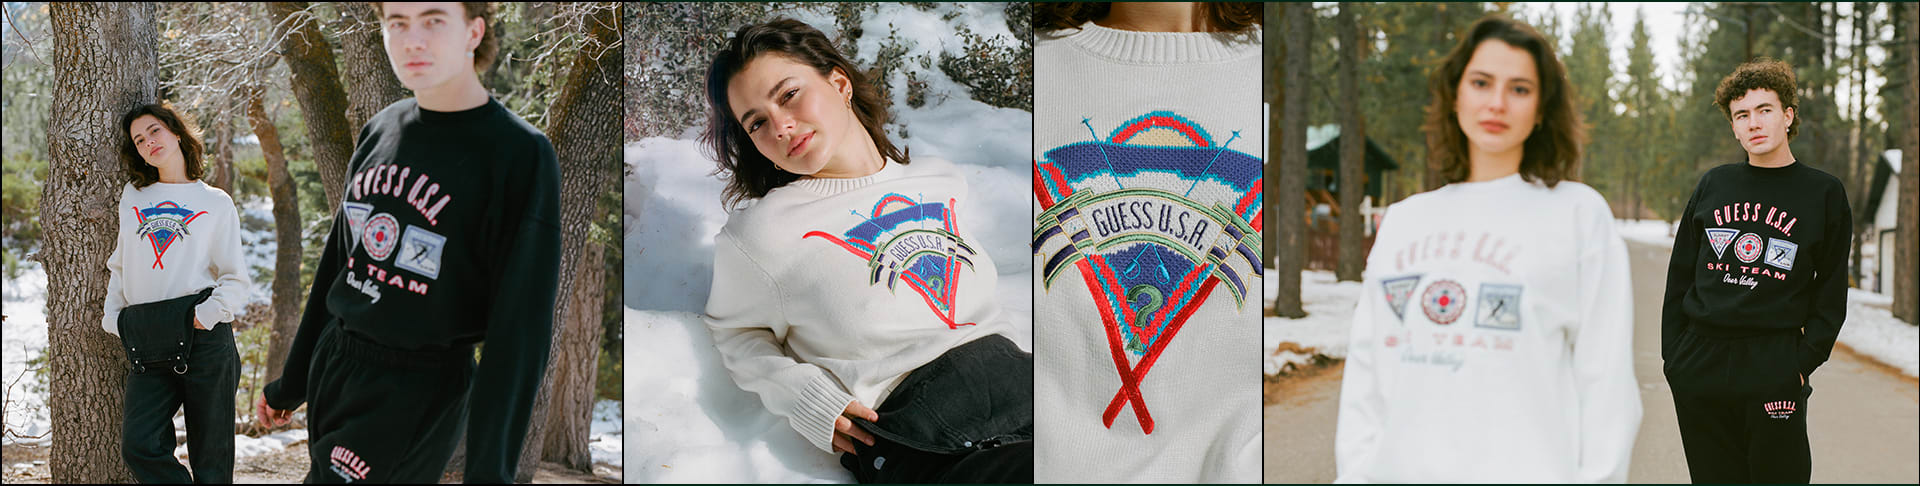 GUESS? USA JANUARY 2021 / ARCHIVE DROP 006 - Slide 01